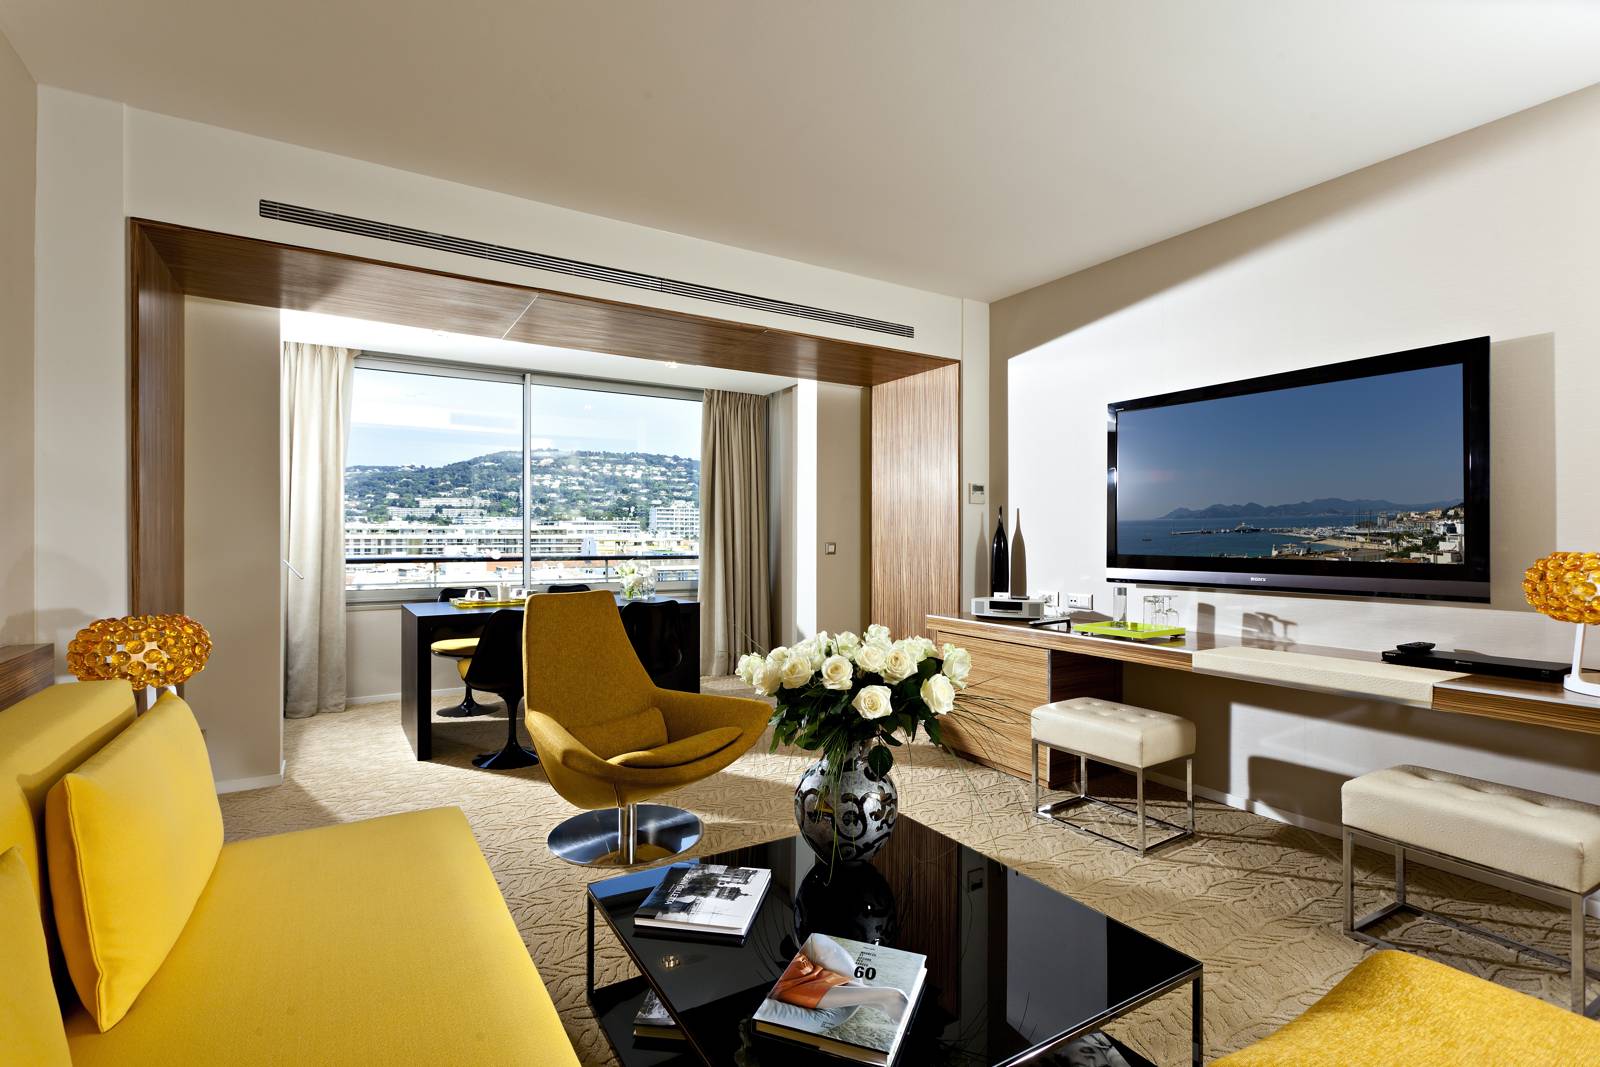 Grand Hotel Cannes bedroom living room lit by large window. - It's time to holiday - Gitaly contract